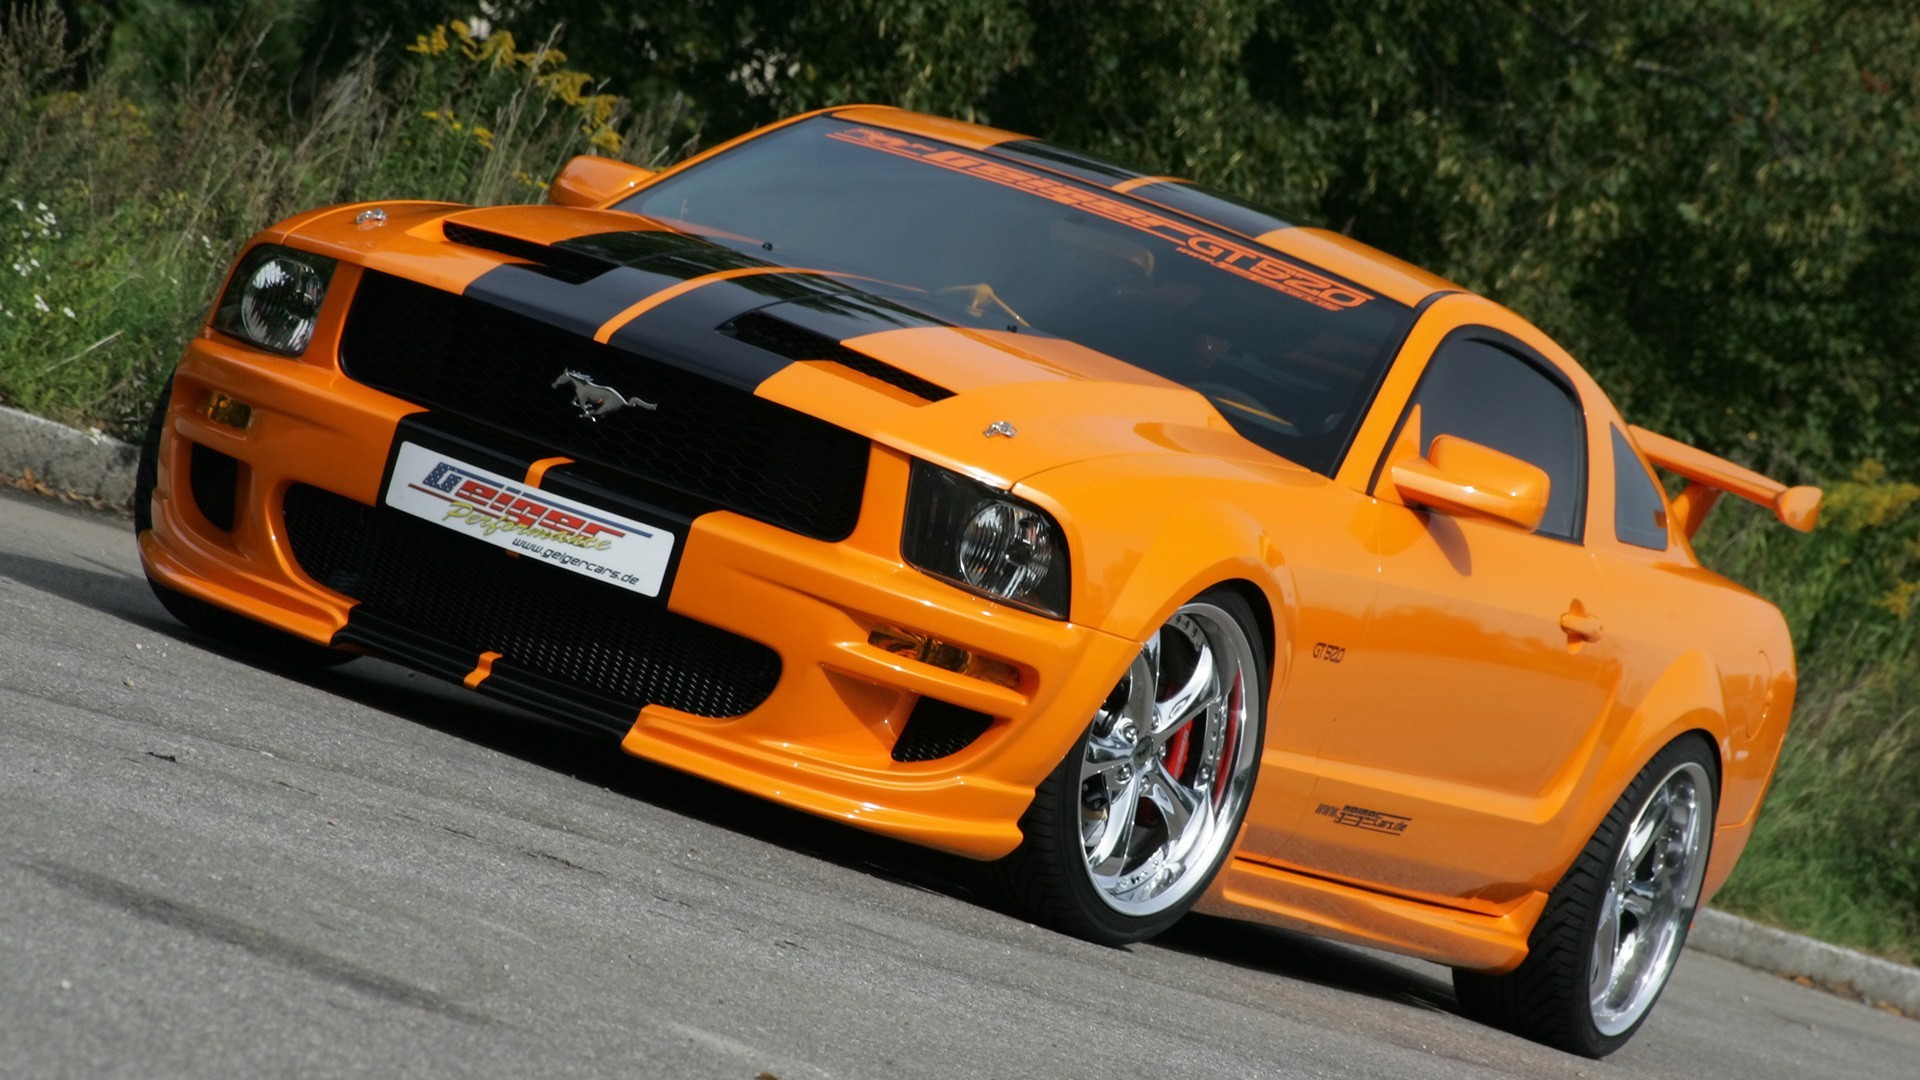 General 1920x1080 Ford Mustang muscle cars vehicle orange cars Ford car racing stripes Ford Mustang S-197 American cars